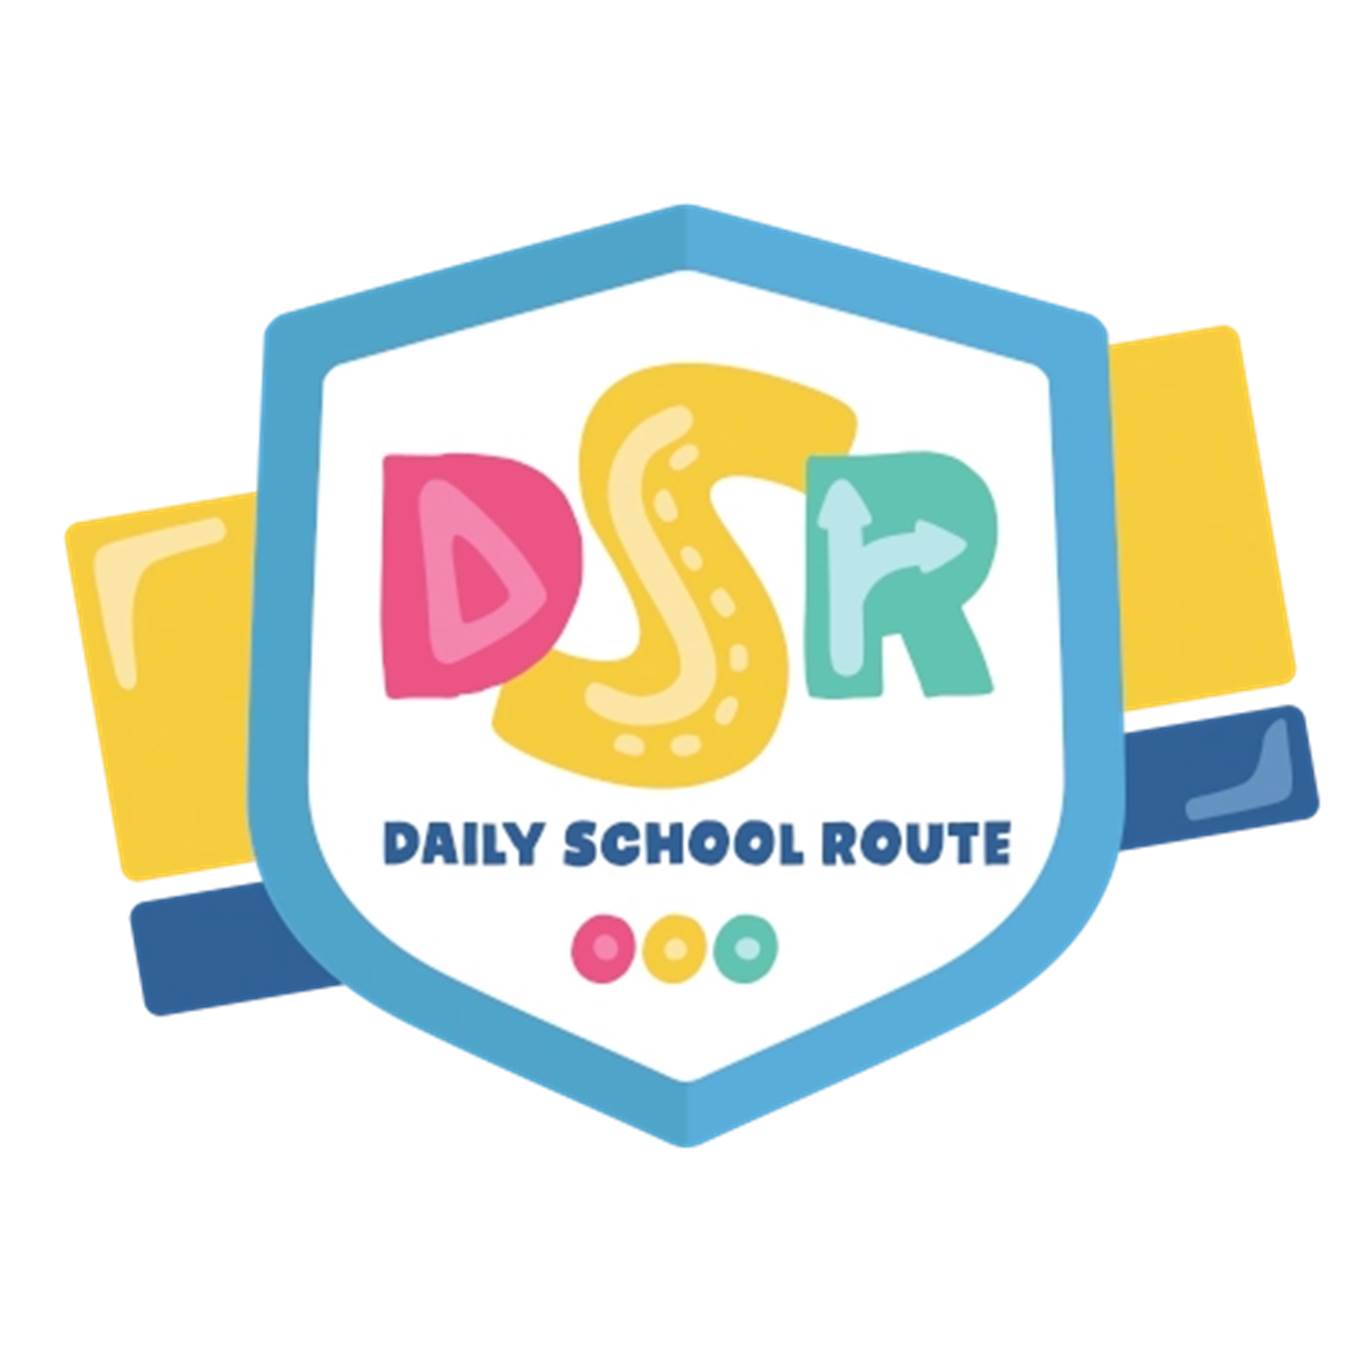 NEW! Daily School Route - An Active Transportation System for Kids!